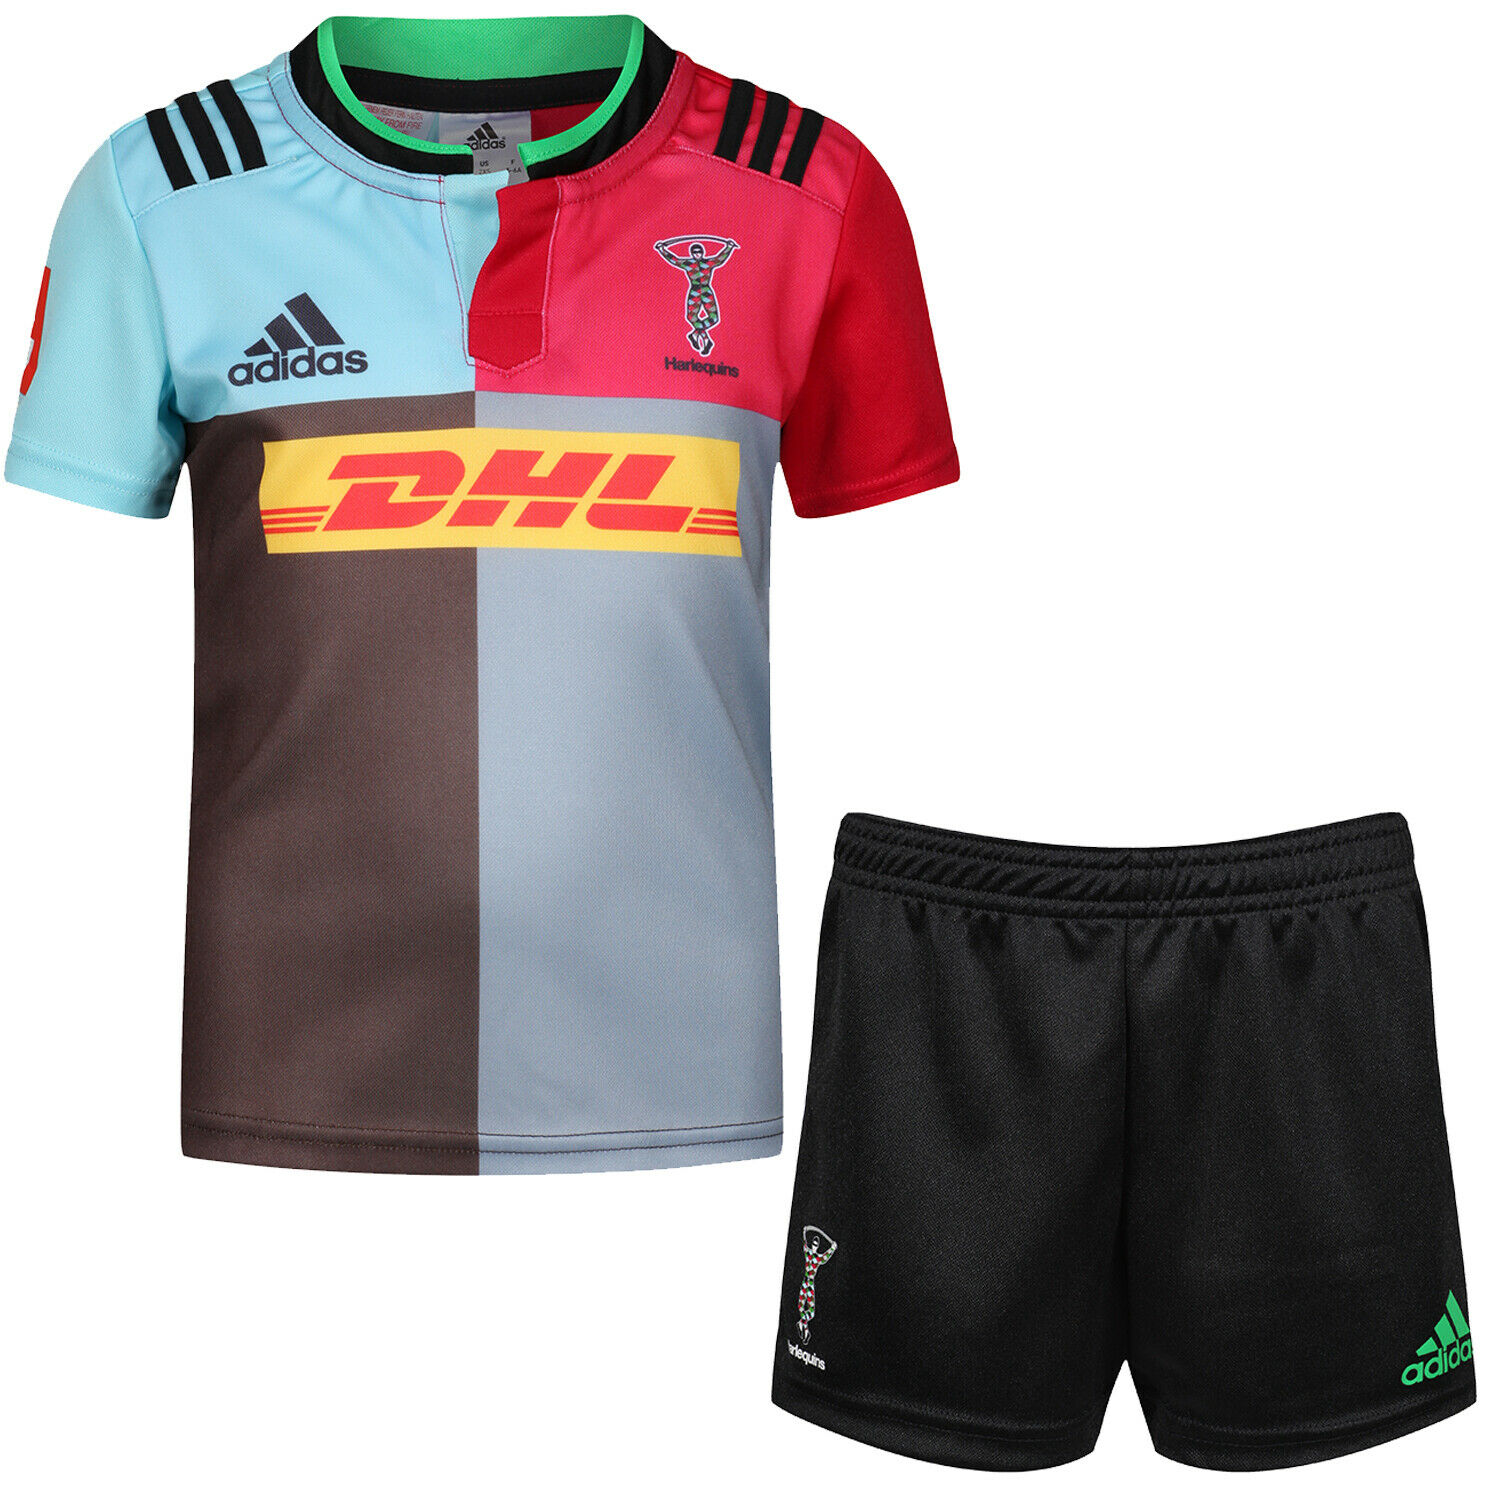 adidas rugby store